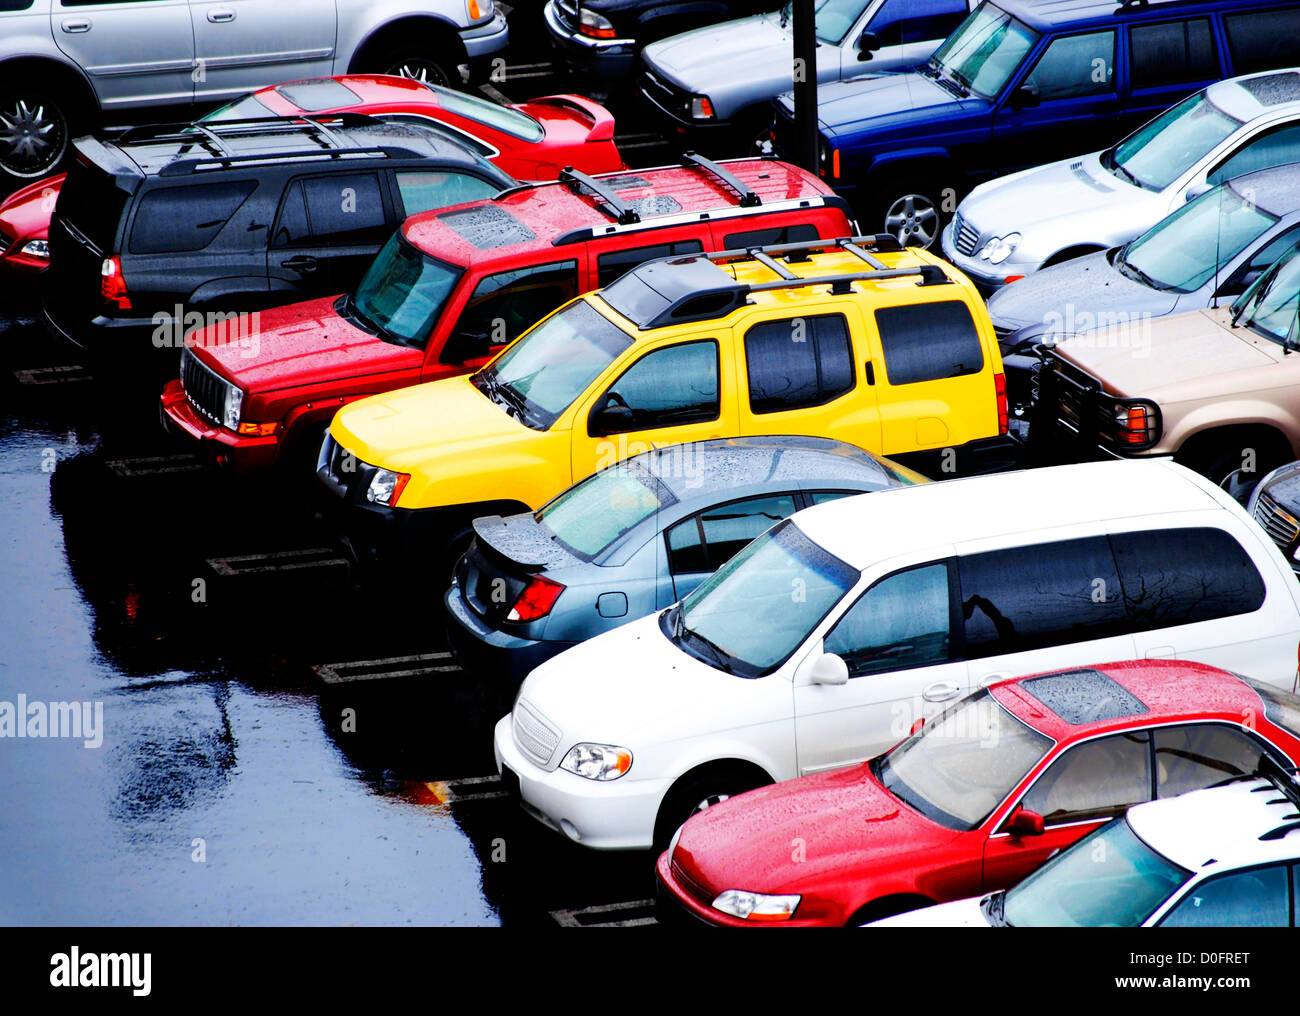 Vehicles for transportation in a row with weather Stock Photo